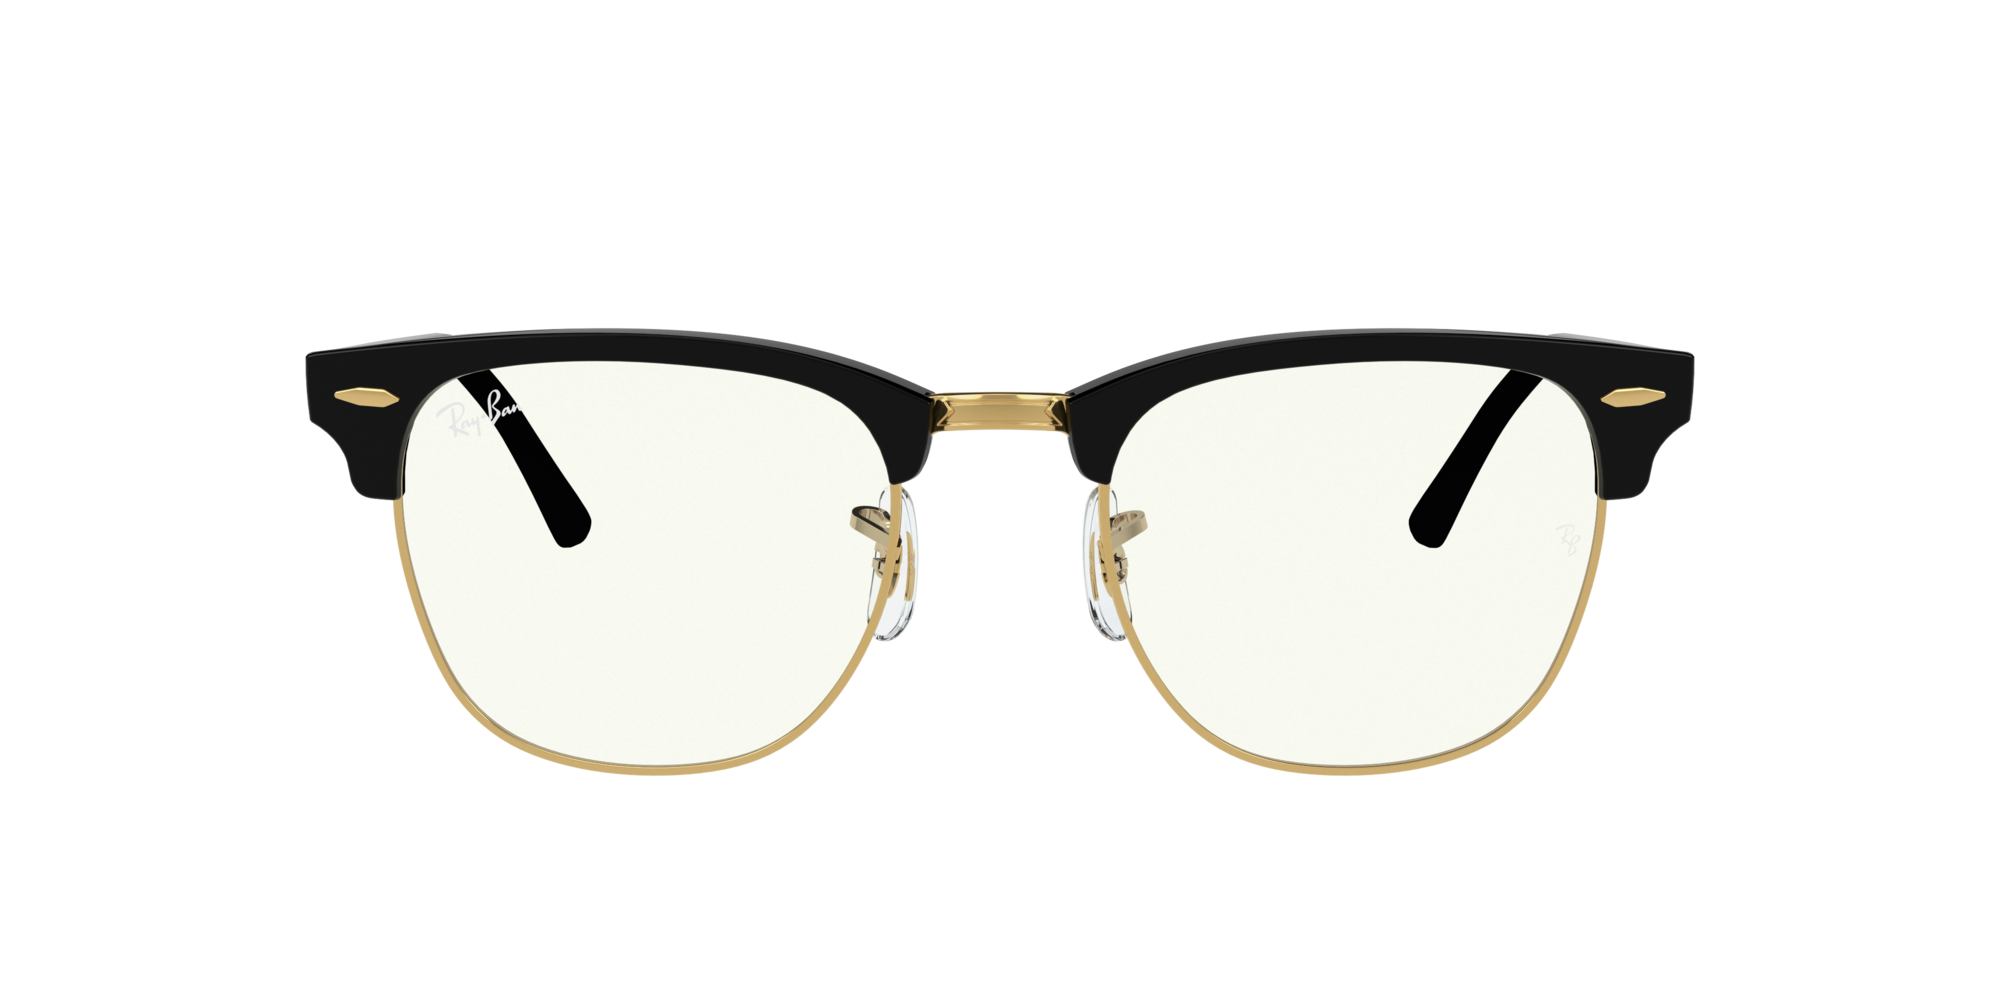 lenscrafters ray ban